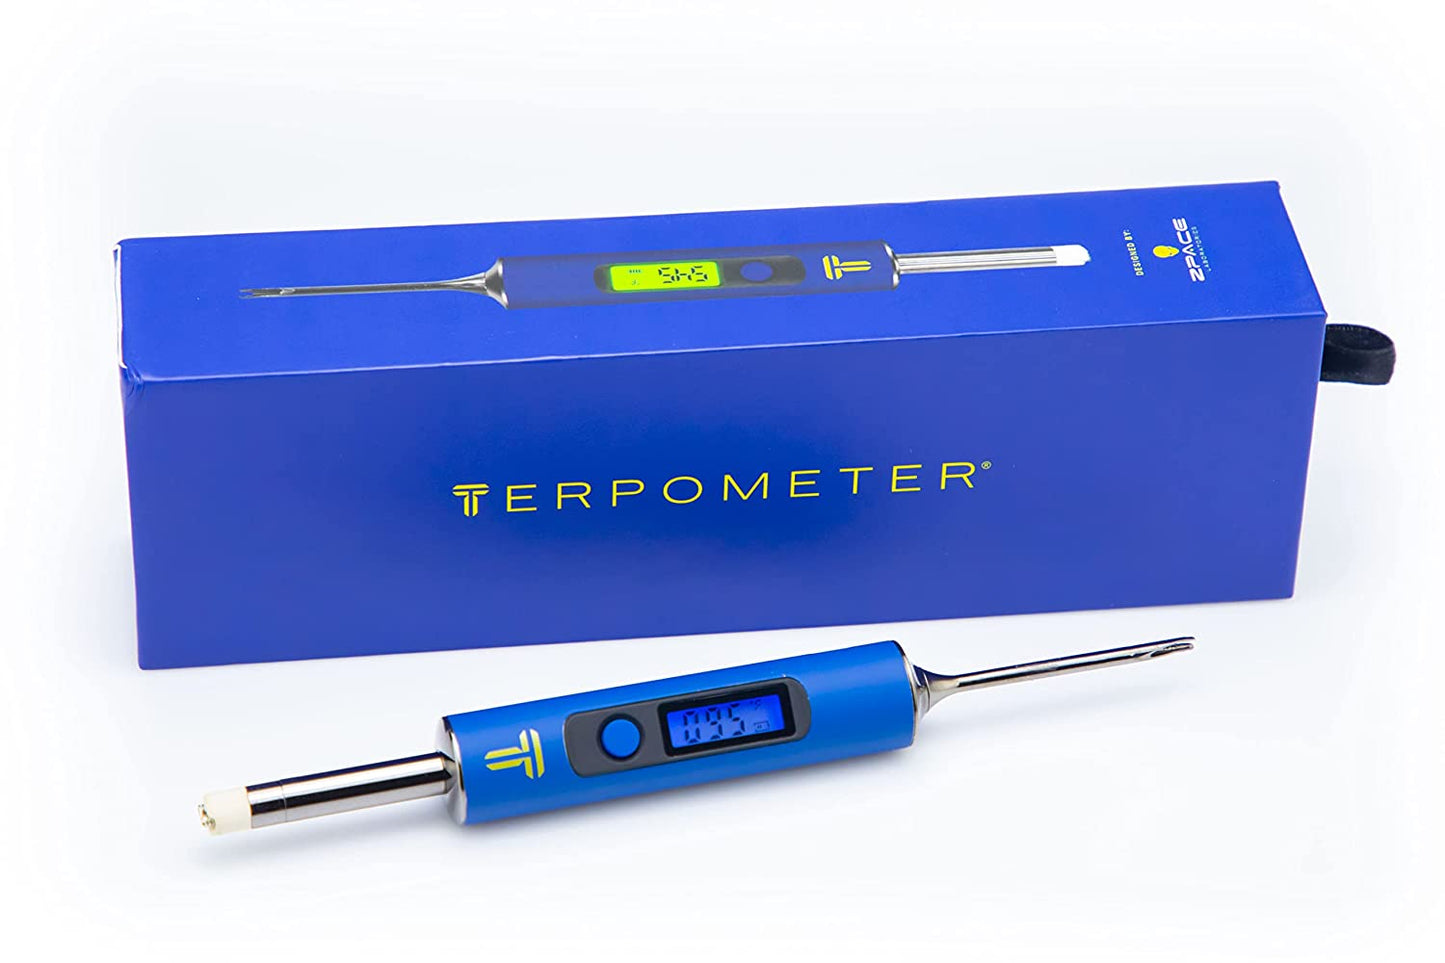 The Terpometer Digital Thermometer